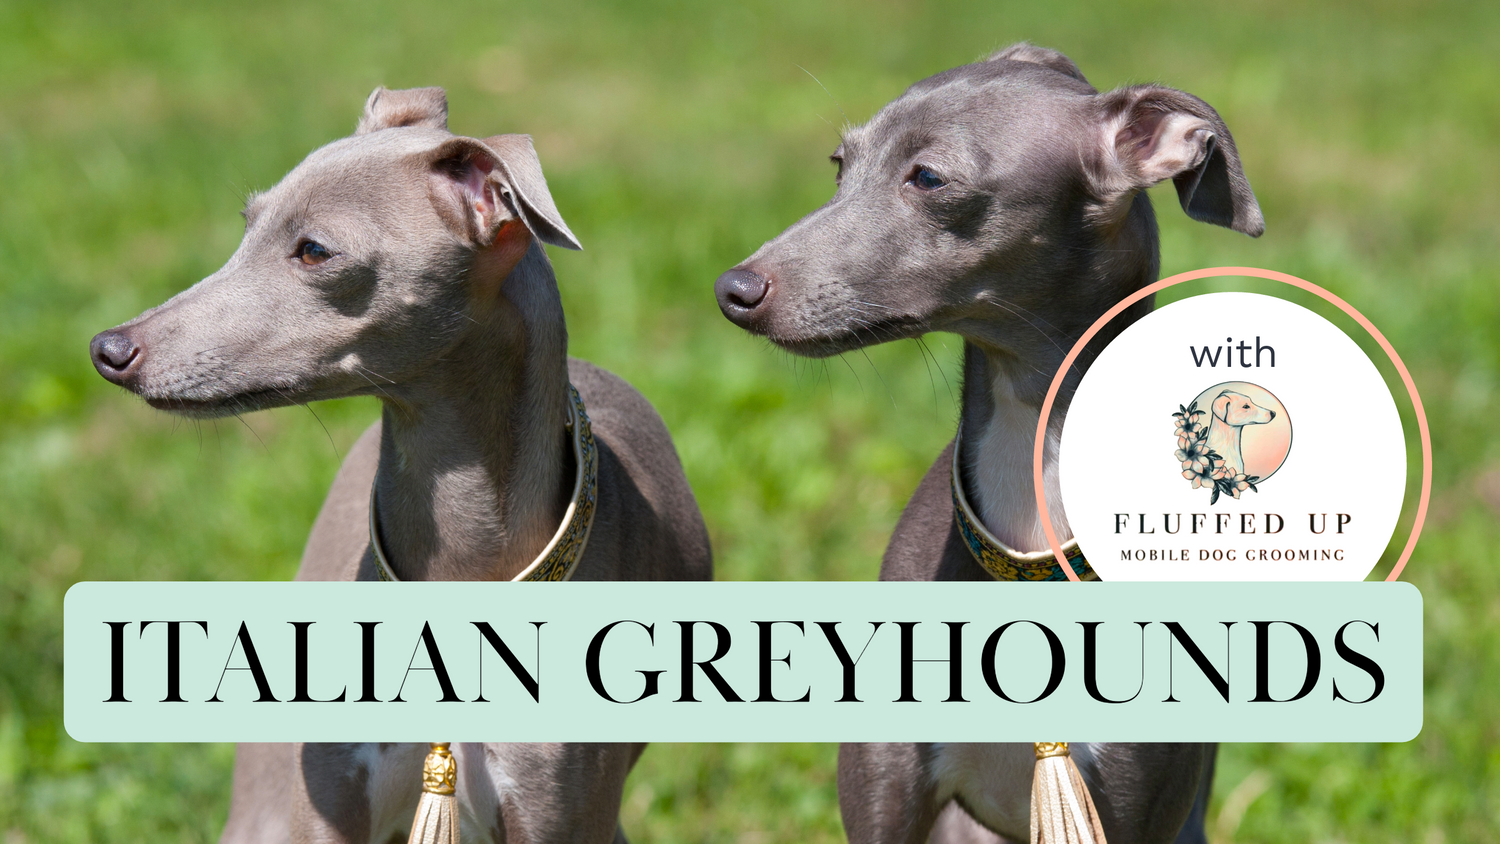 Two grey Italian Greyhounds with a blurry green background and a box with text “Italian Greyhounds”